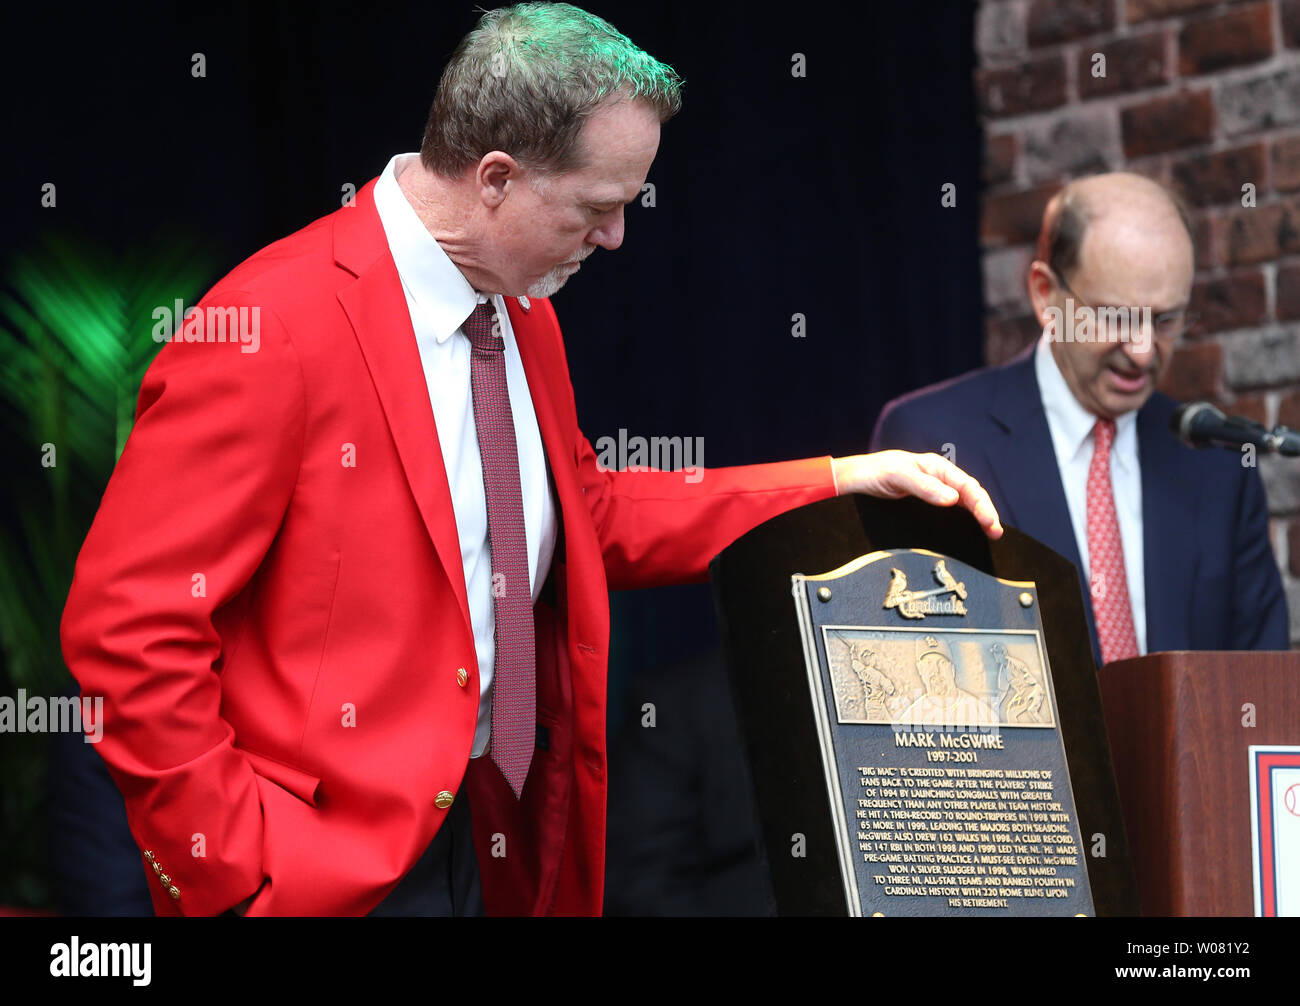 Newly inducted St. Louis Cardinals Hall of Fame member Mark McGwire looks at his placque as Cardinals Chairman Bill DeWitt Jr.reads an introduction during the St. Louis Cardinals Hall of Fame Induction ceremonies in St. Louis on August 26, 2017. McGwire played 4 1/2 years with the Cardinals breaking Roger Maris' home run record, hitting 70 home runs in 1998 and is now the bench coach for the San Diego Padres.       Photo by Bill Greenblatt/UPI Stock Photo